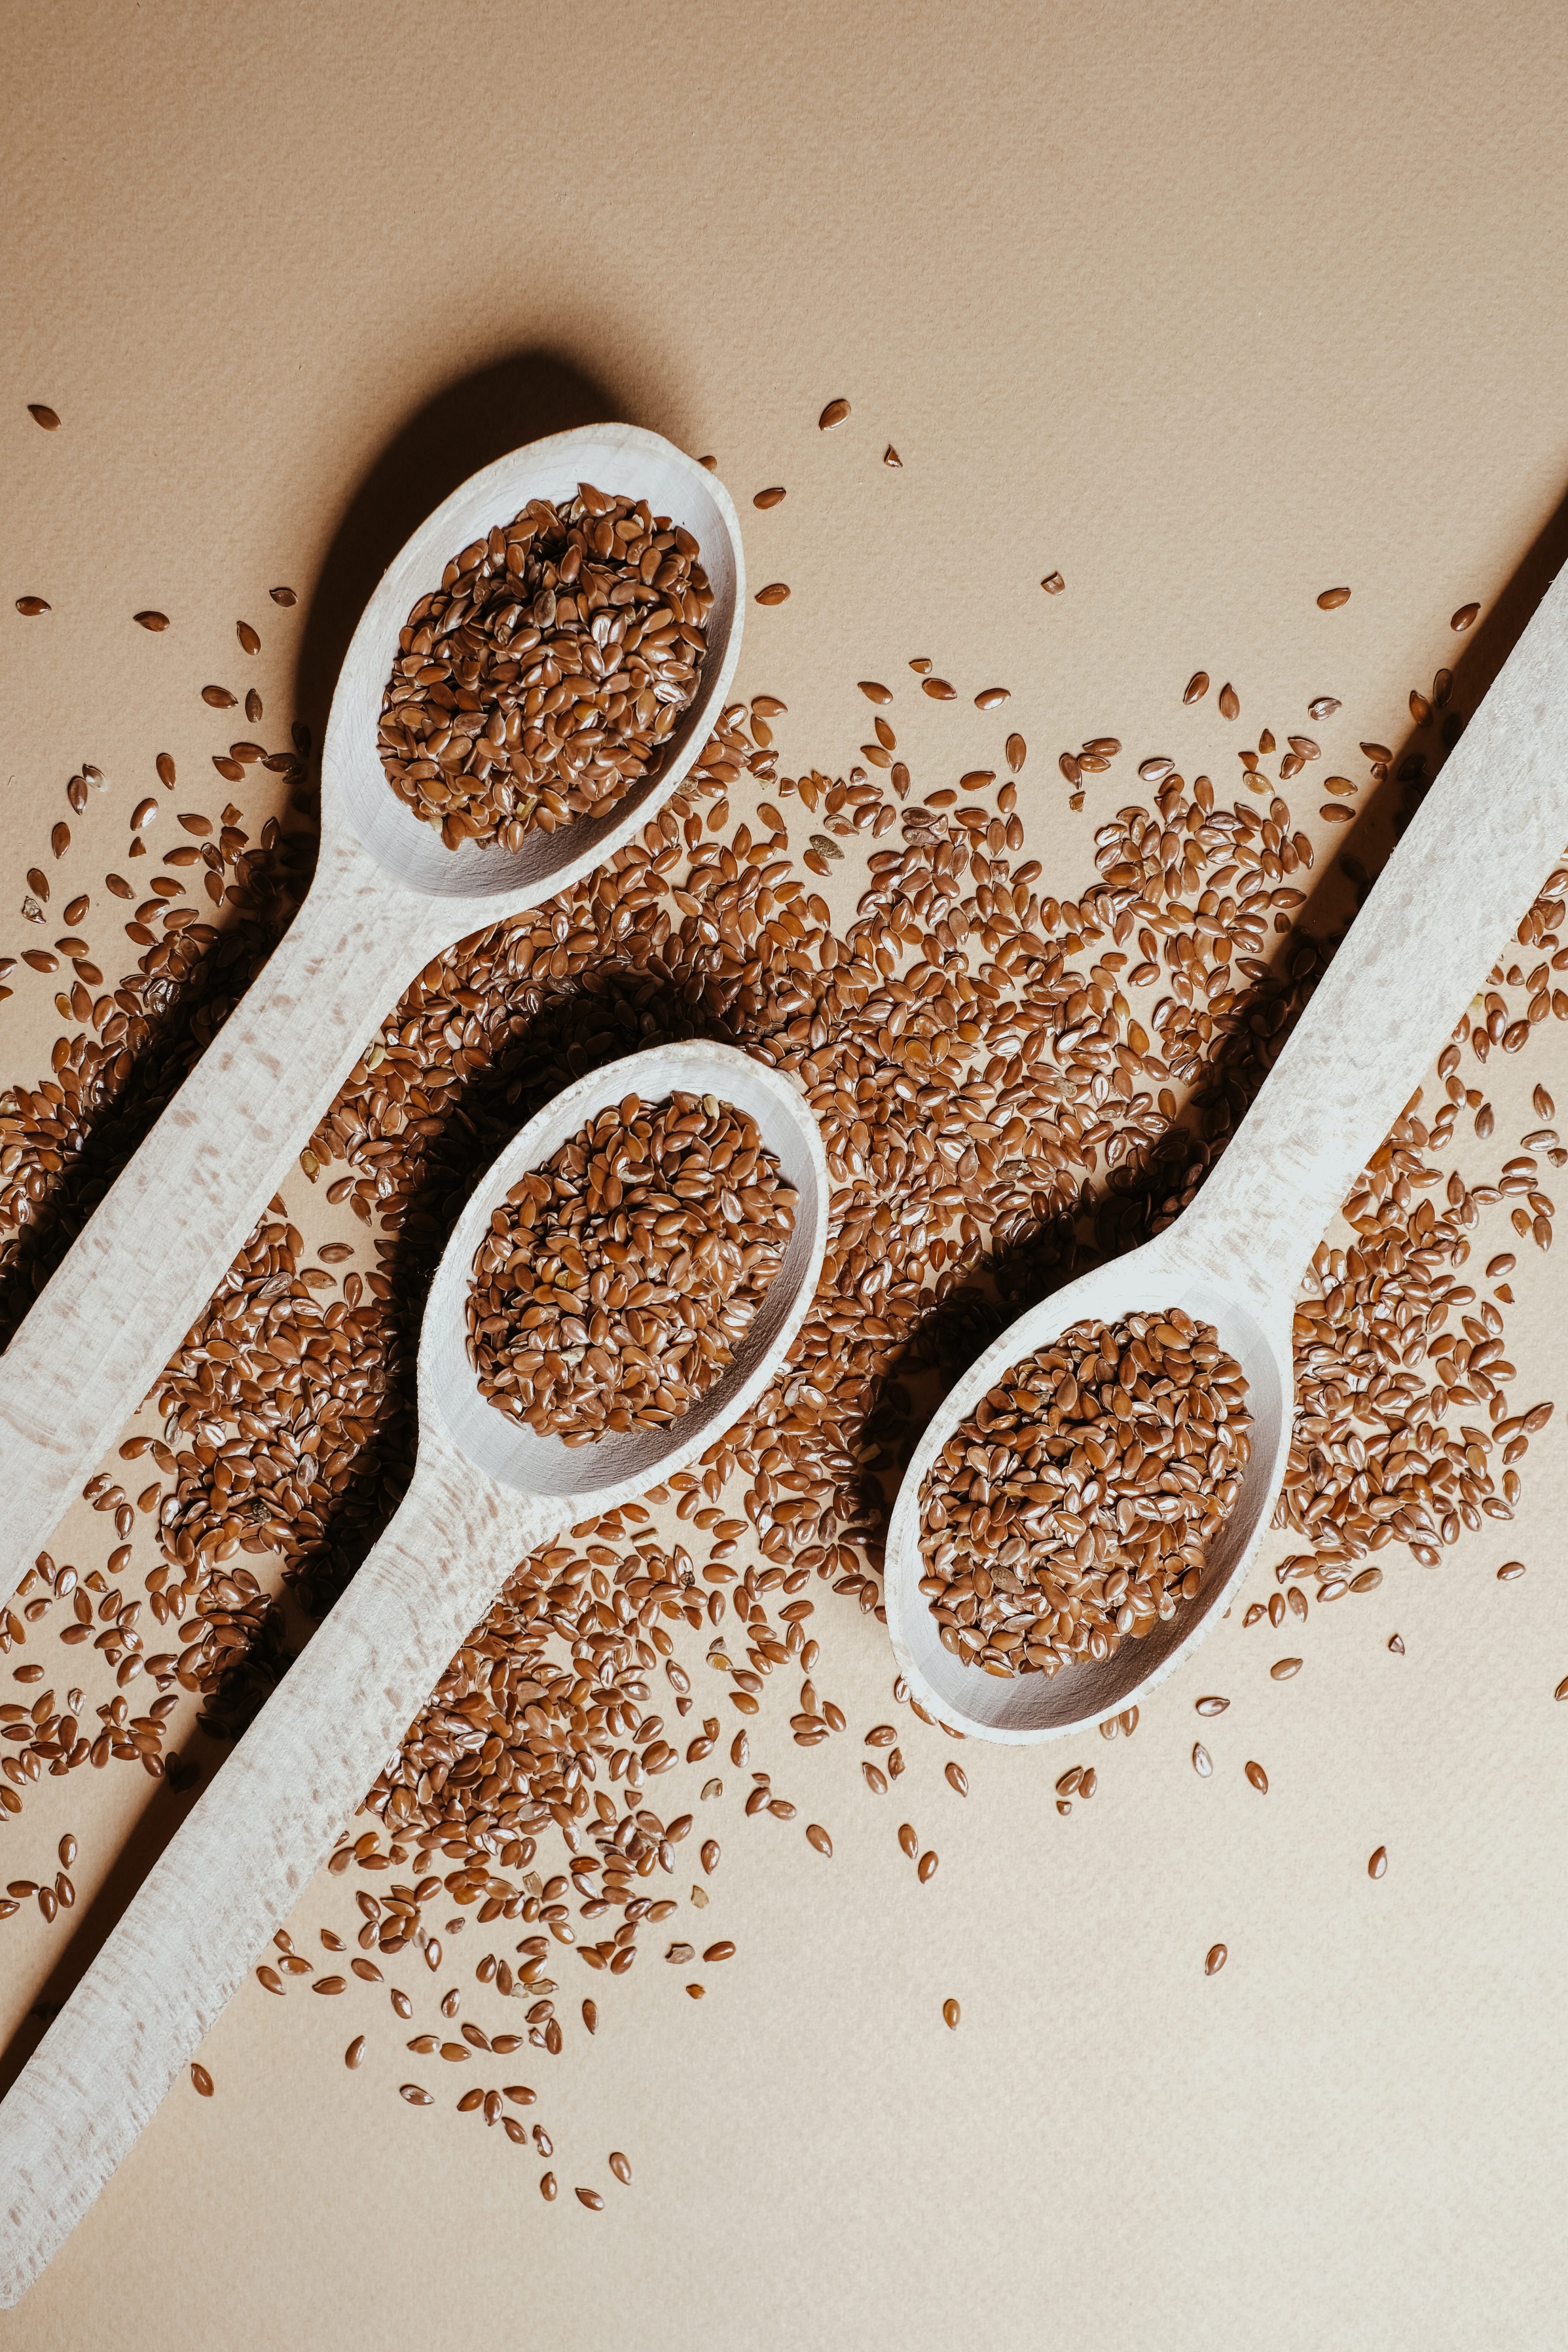 Flaxseeds can help lower estrogen levels and promote healthy detox